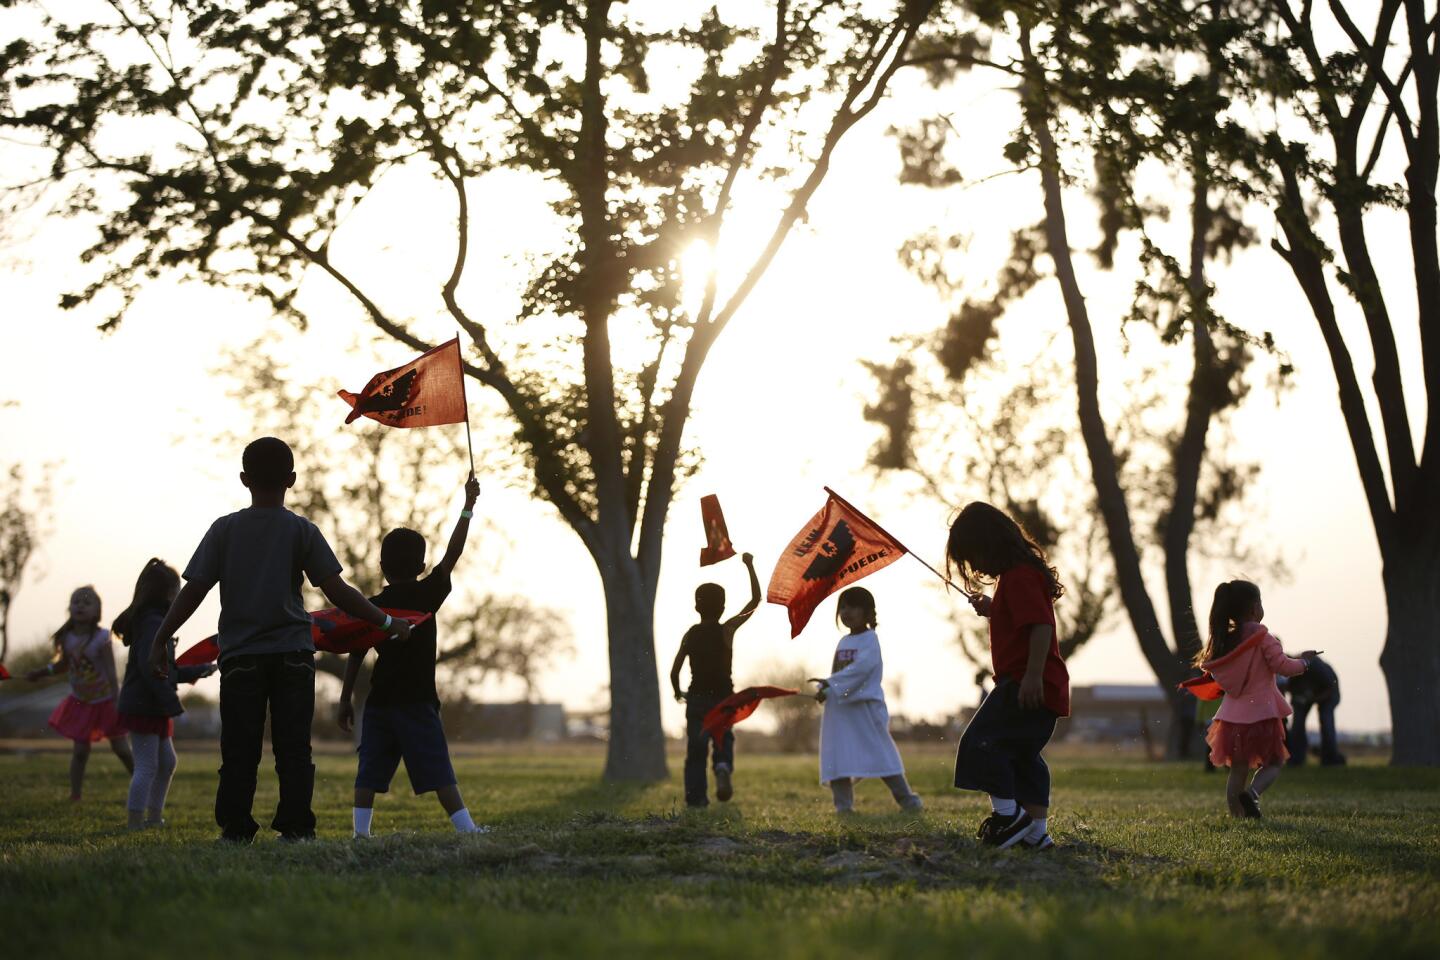 Children play in a field at the 40 Acres, the birthplace of the United Farm Workers union, where hundreds of field workers and family members previewed a special screening of "Cesar Chavez."